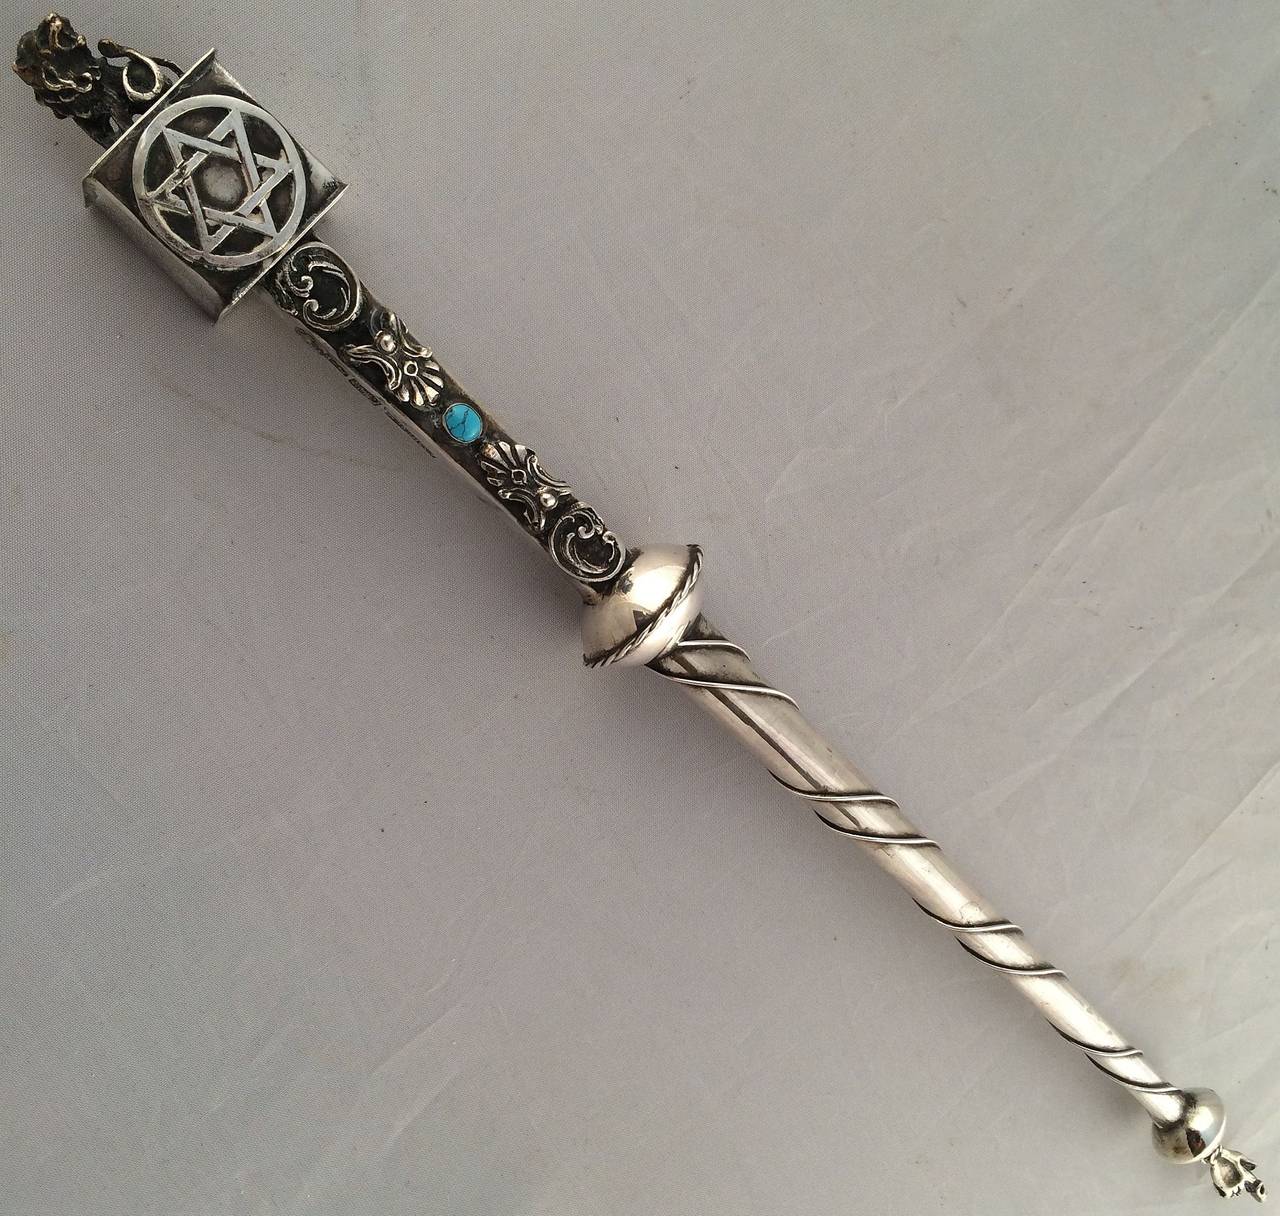 A fine Jewish yad or torah pointer of silver featuring a Lion of Judah on the handle end with a traditional pointed finger hand on the other end. With decorative blue stone and Star of David. A handsome find for the Judaica collector.

A yad